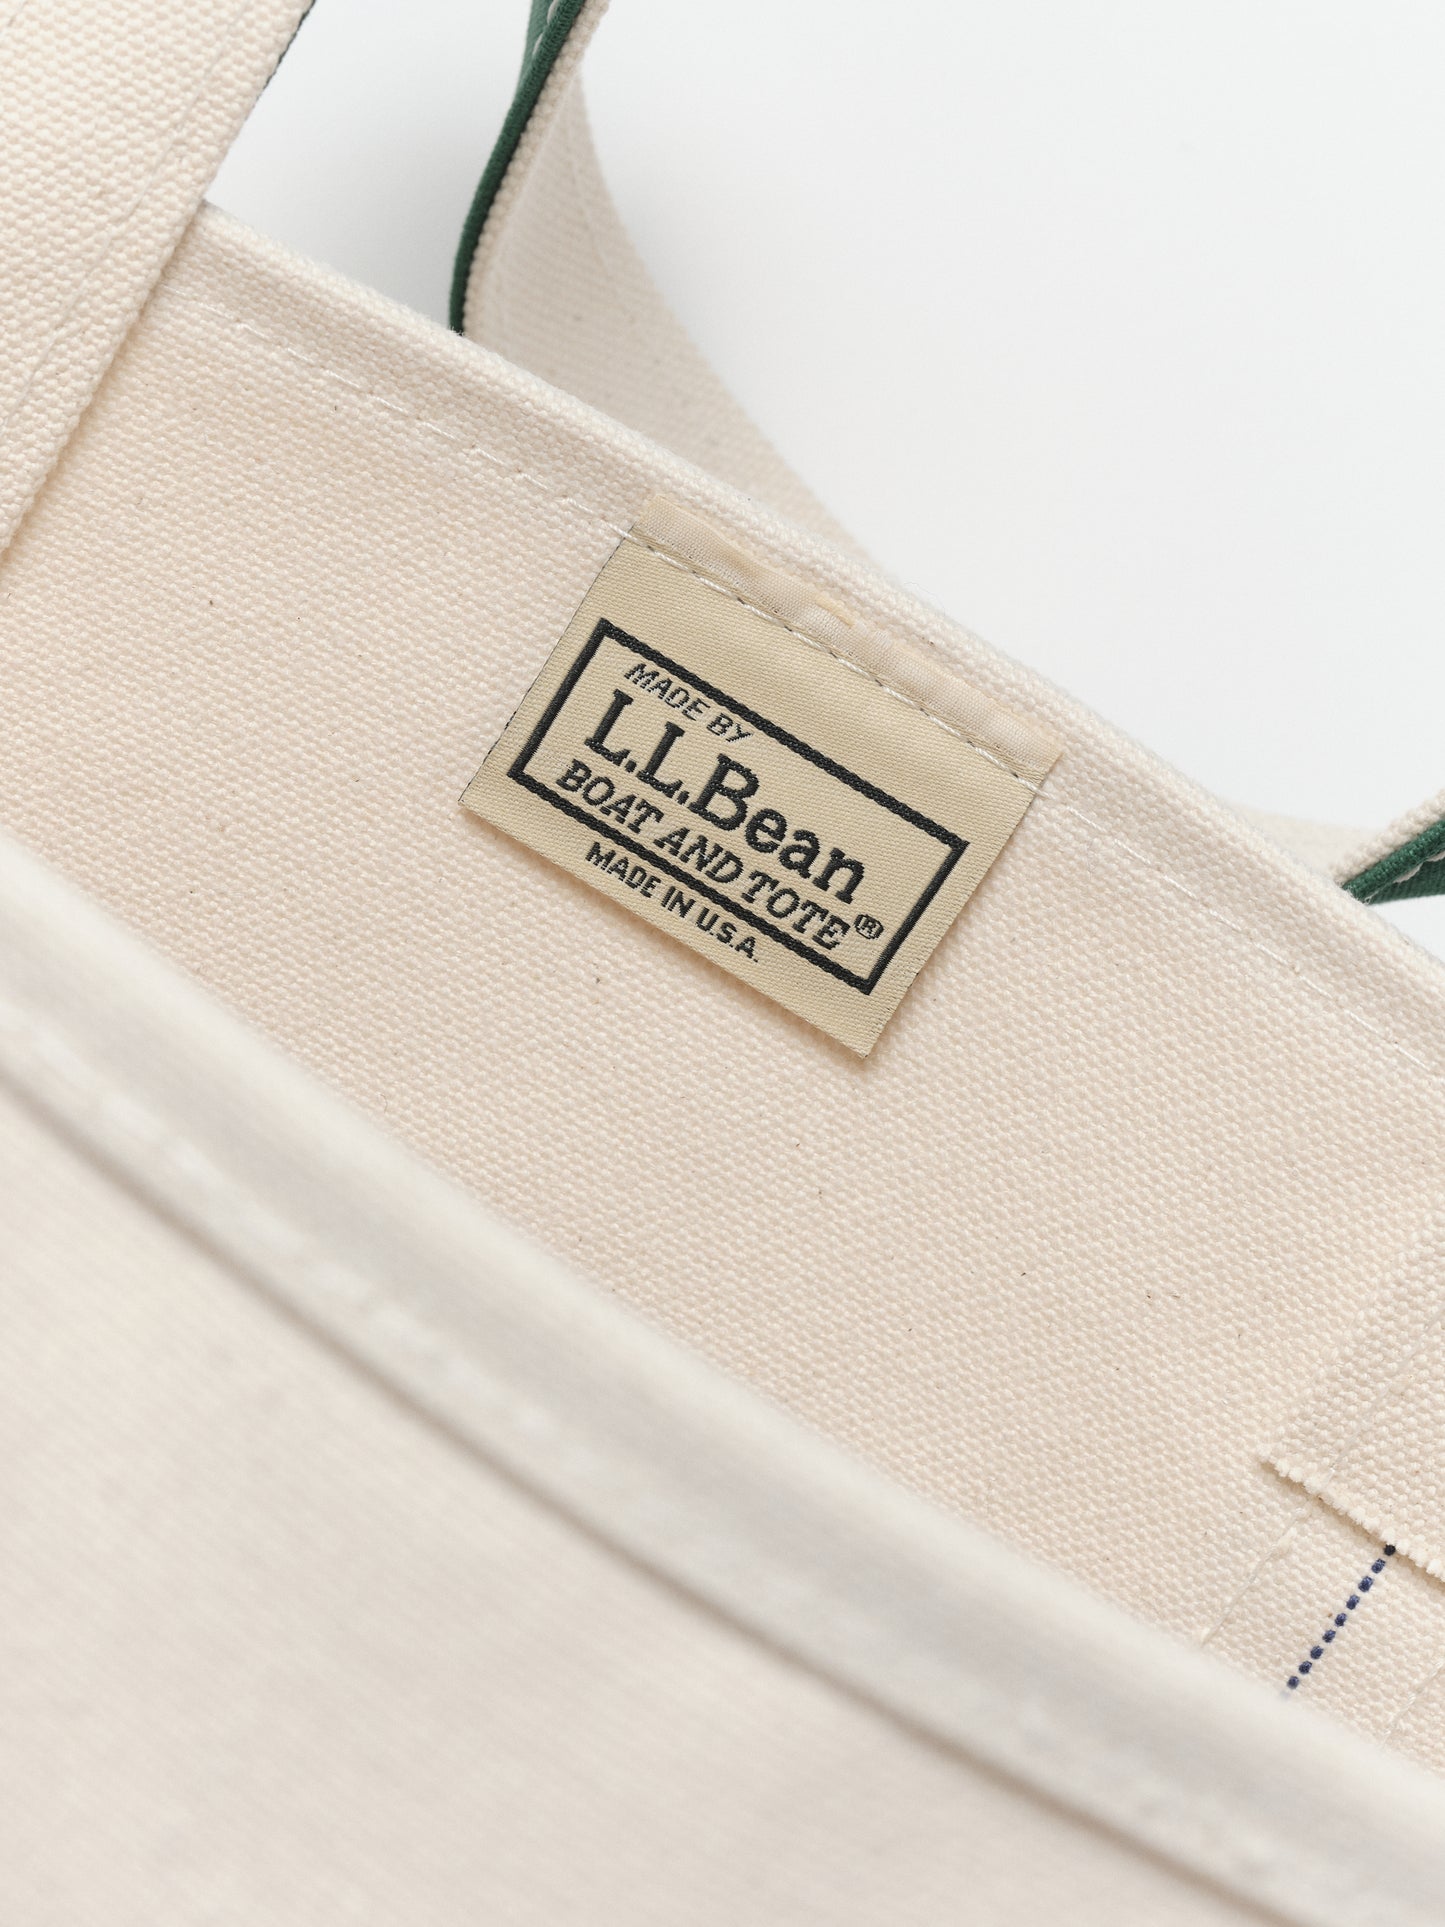 ACL Newsletter Subscription with Medium LL Bean Tote